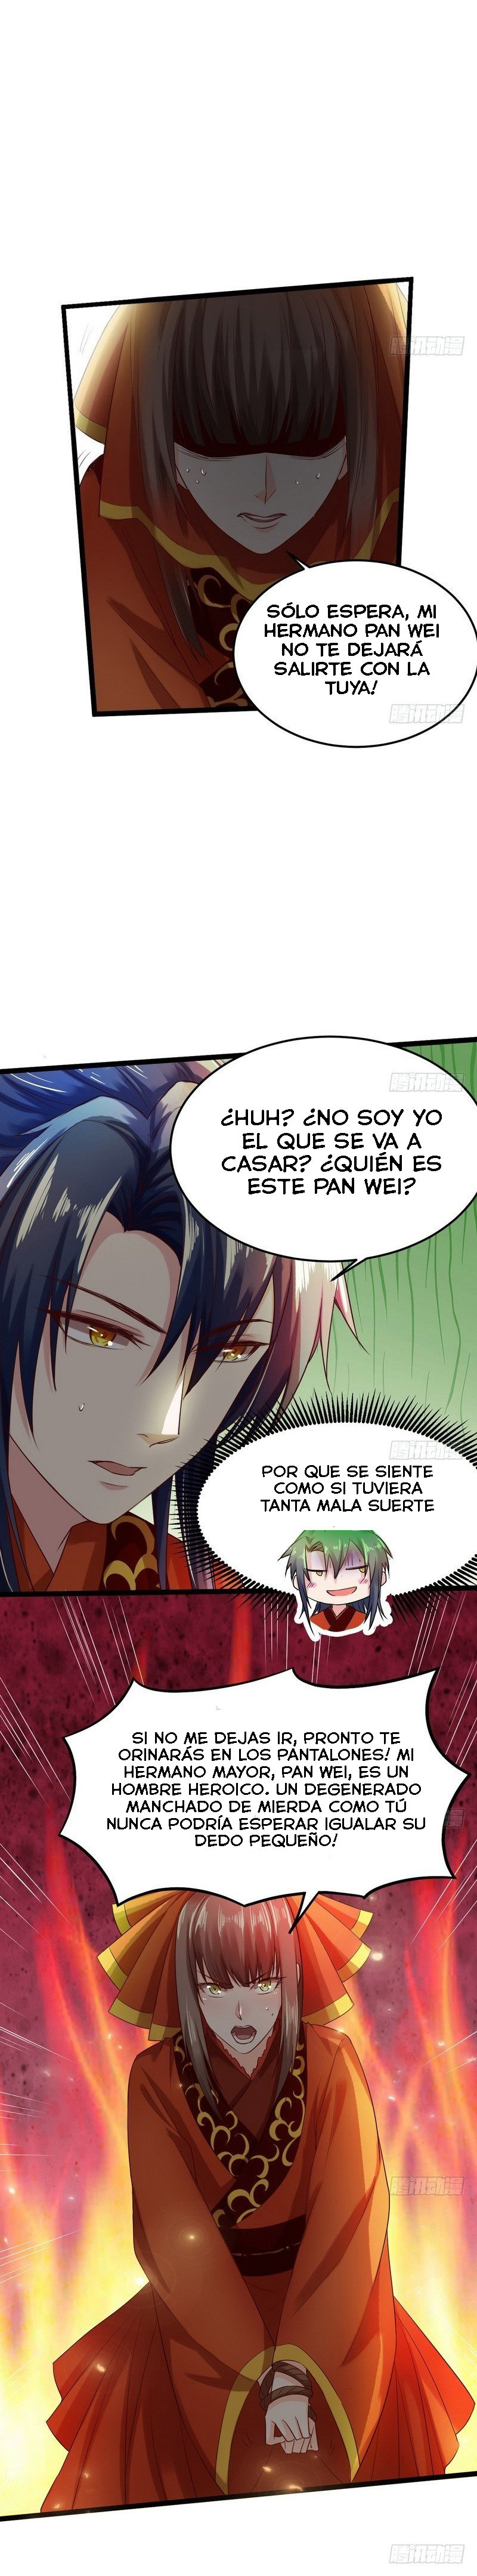 Manga Soy un dios maligno Chapter 4 image number 32